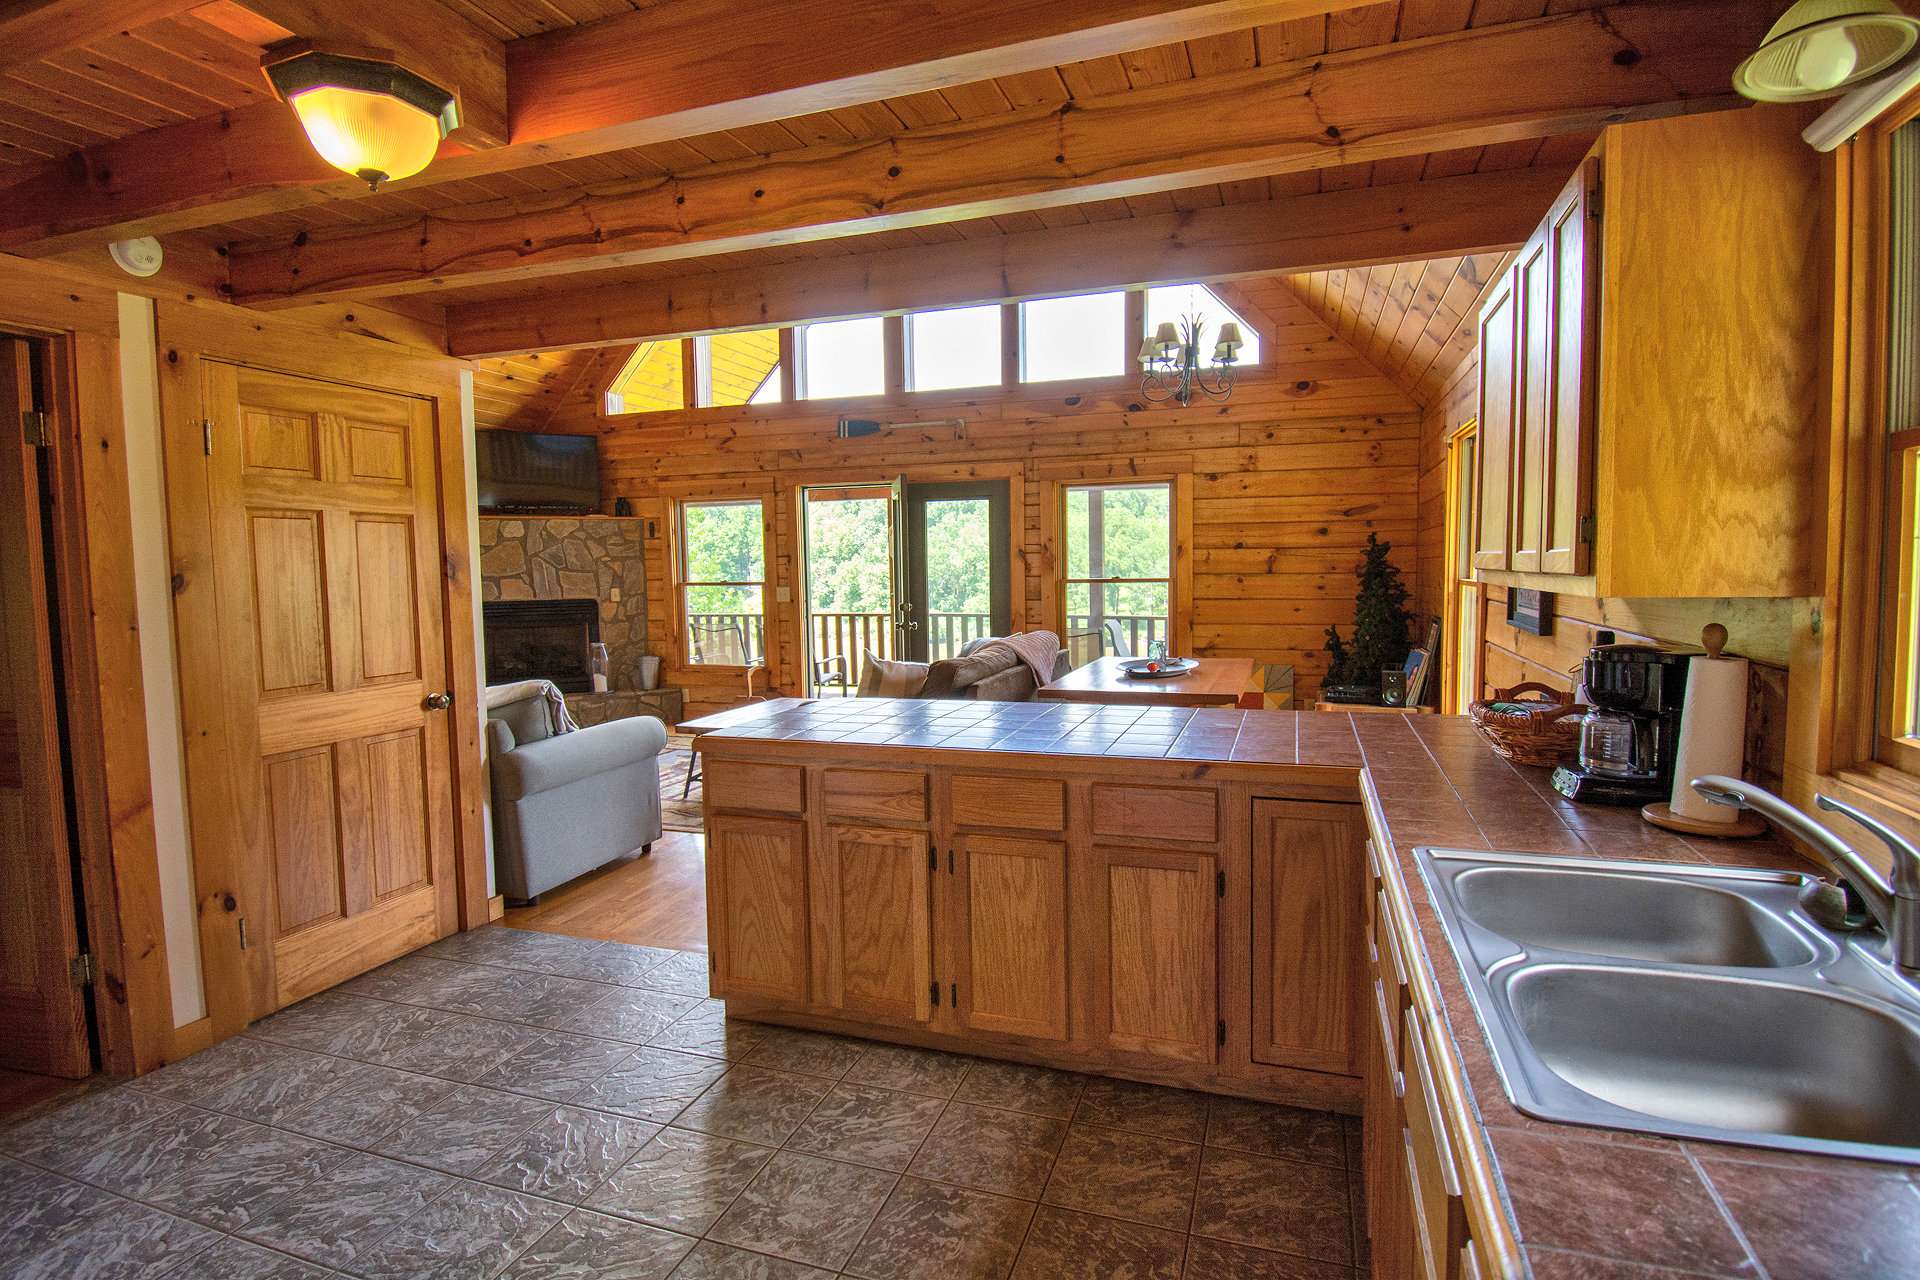 The dining space allows you to enjoy the outdoor scenery through all four seasons in the High Country.